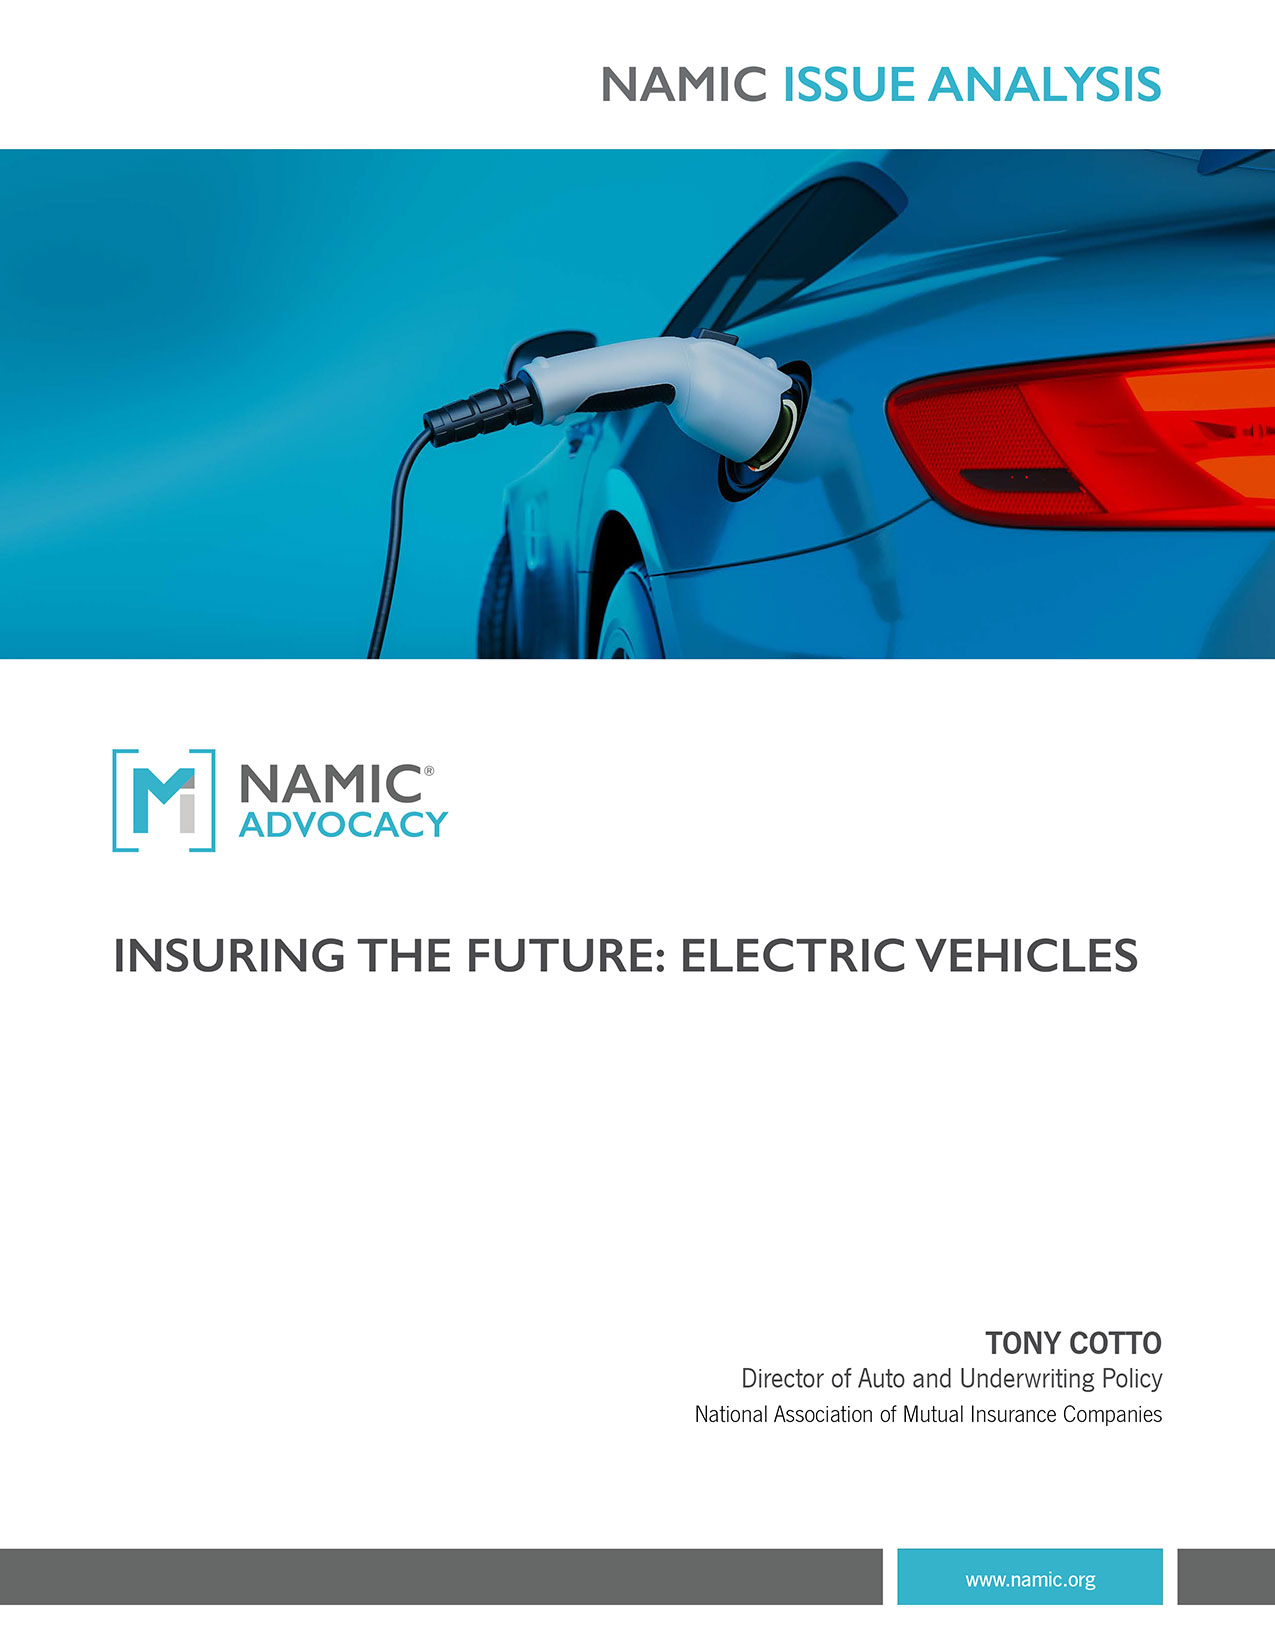 INSURING THE FUTURE: ELECTRIC VEHICLES